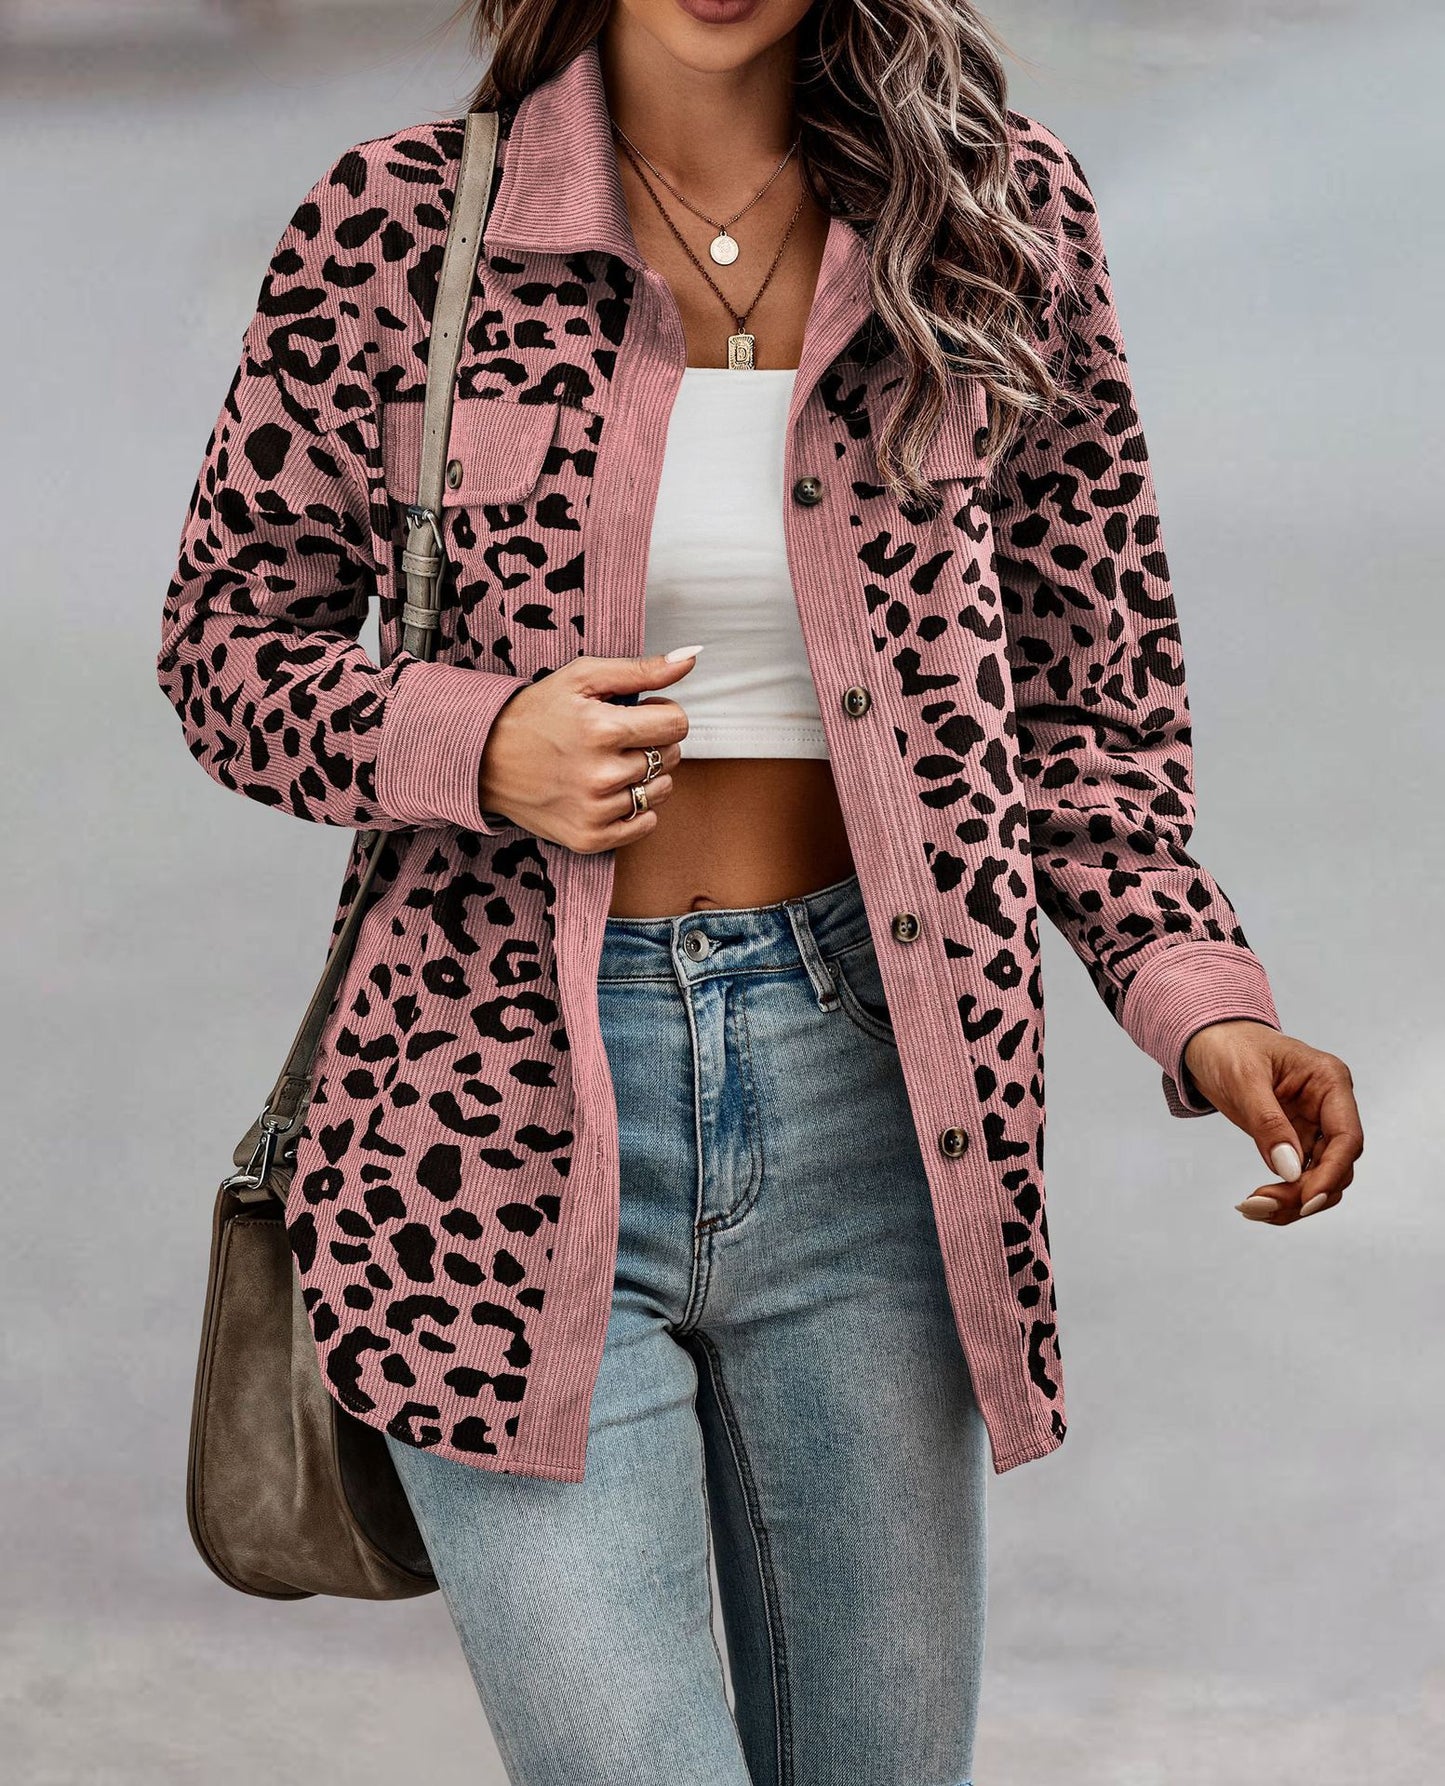 Elevate Your Style with Our Leopard Print Shirt Coat